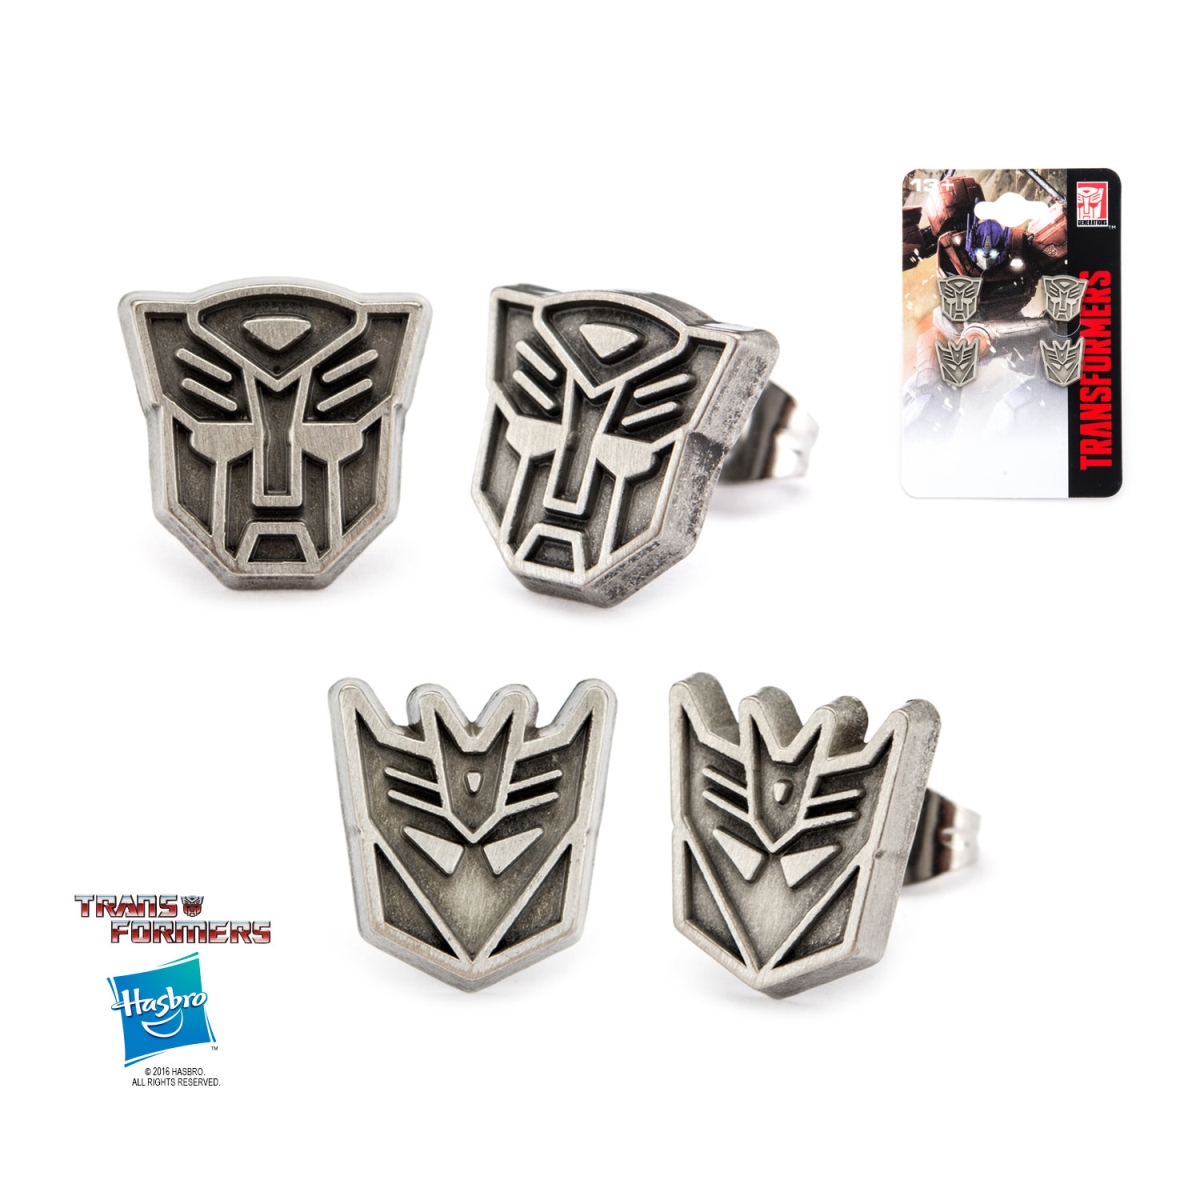 Tfaderset Transformers Base Metal With Antique Nickel Finish Autobot & Decepticon Logo With Stainless Steel Post Stud Earrings Set For Men & Women